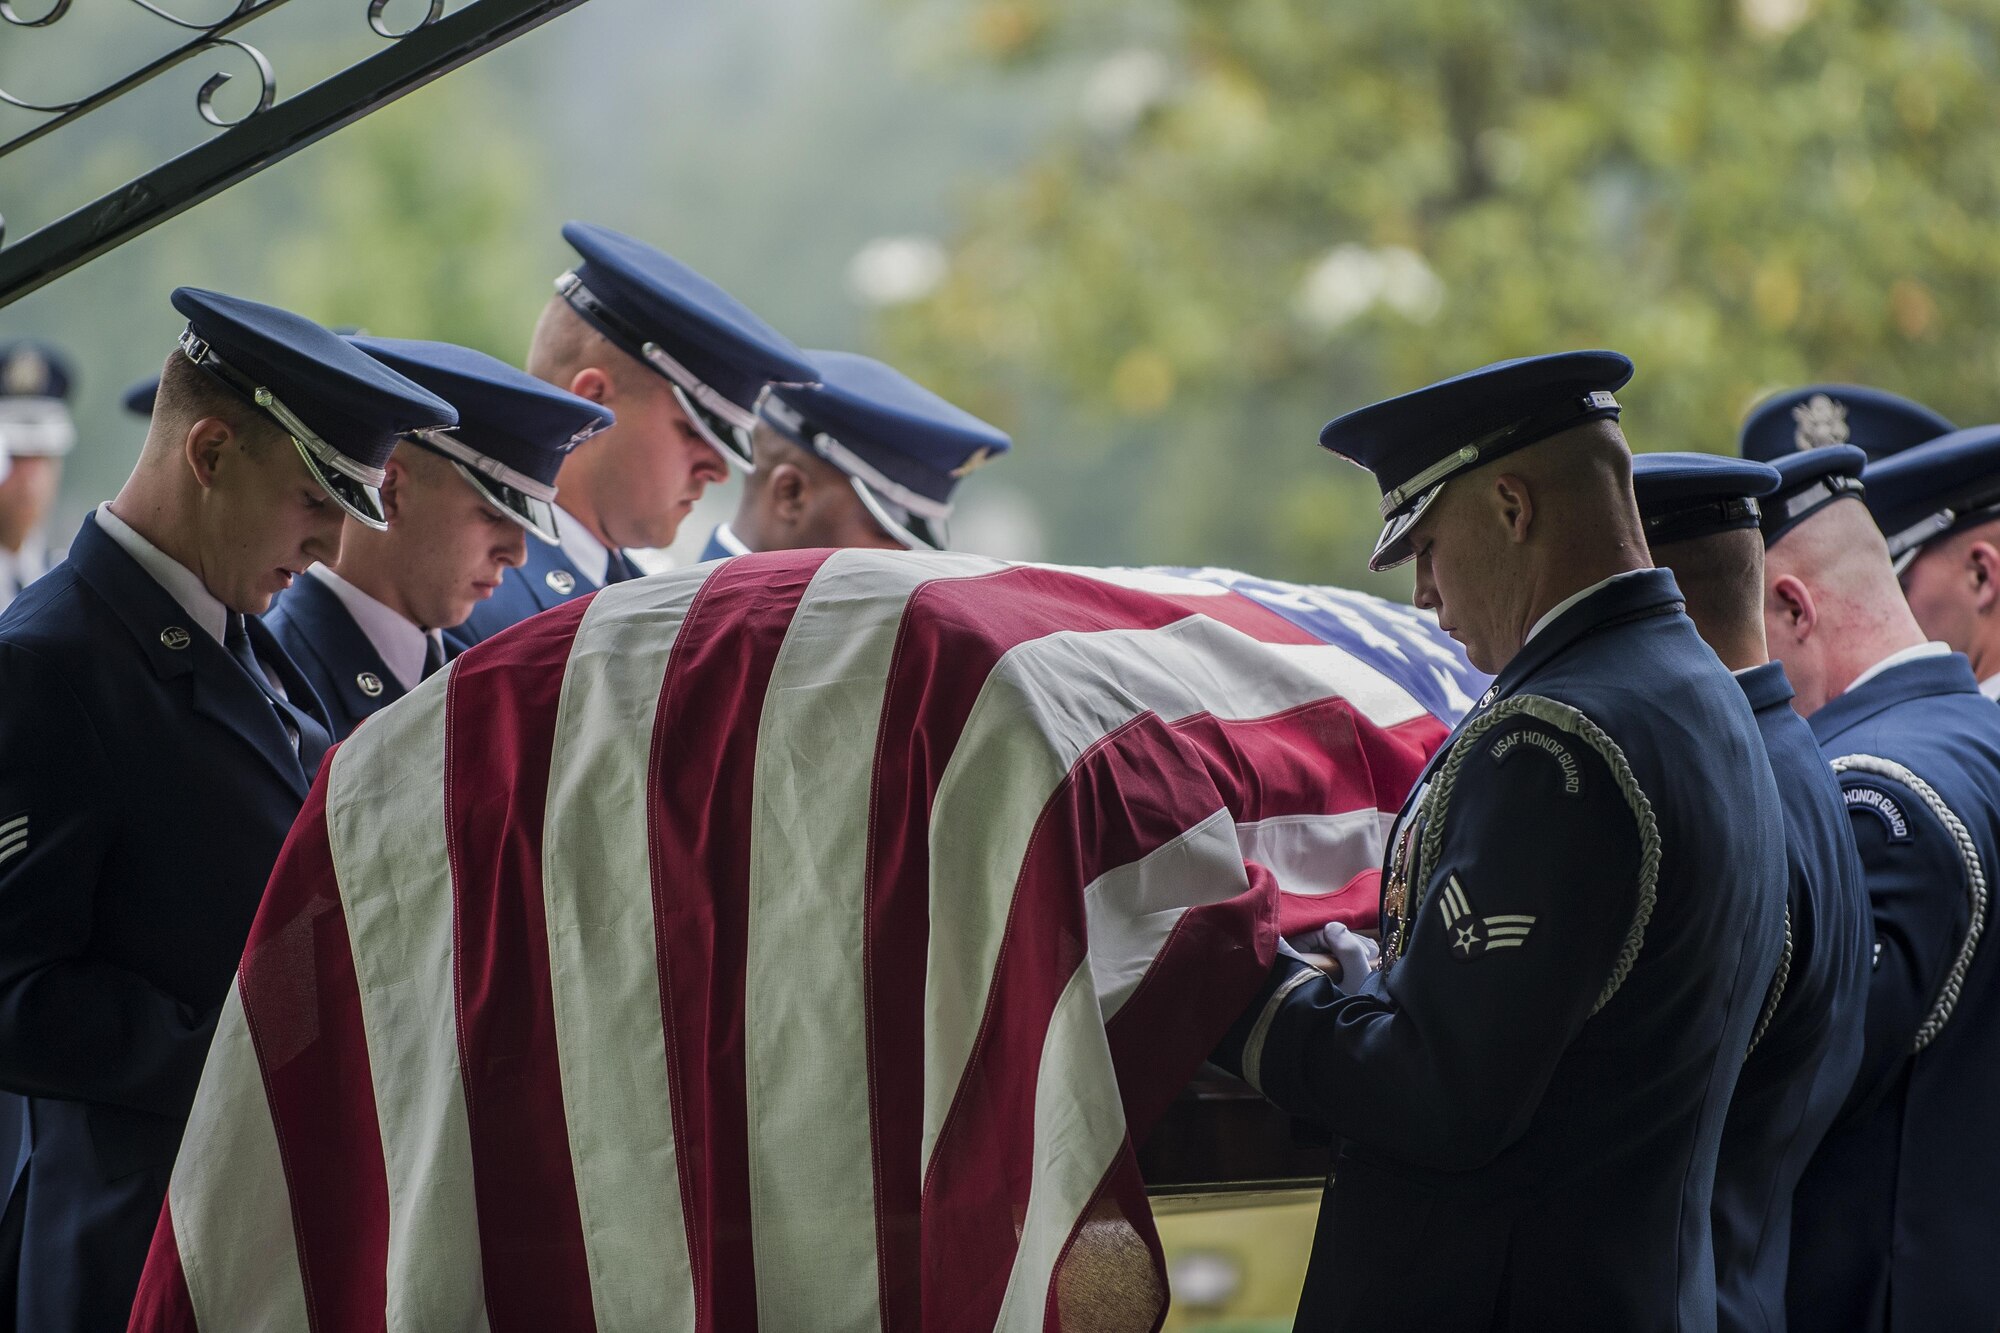 U.S. Air Force Honor Guard members carry the casket of Lt. Col. William “Bill” Schroeder, during his interment, June 16, 2016, at Arlington Nation Cemetery, Virginia. Schroeder, 39, was a special operations weather officer who identified a perilous situation and reacted swiftly by putting himself between an armed individual and his first sergeant. In the process, he saved lives of other squadron members while being fatally wounded. (U.S. Air Force photo by Airman 1st Class Philip Bryant) 